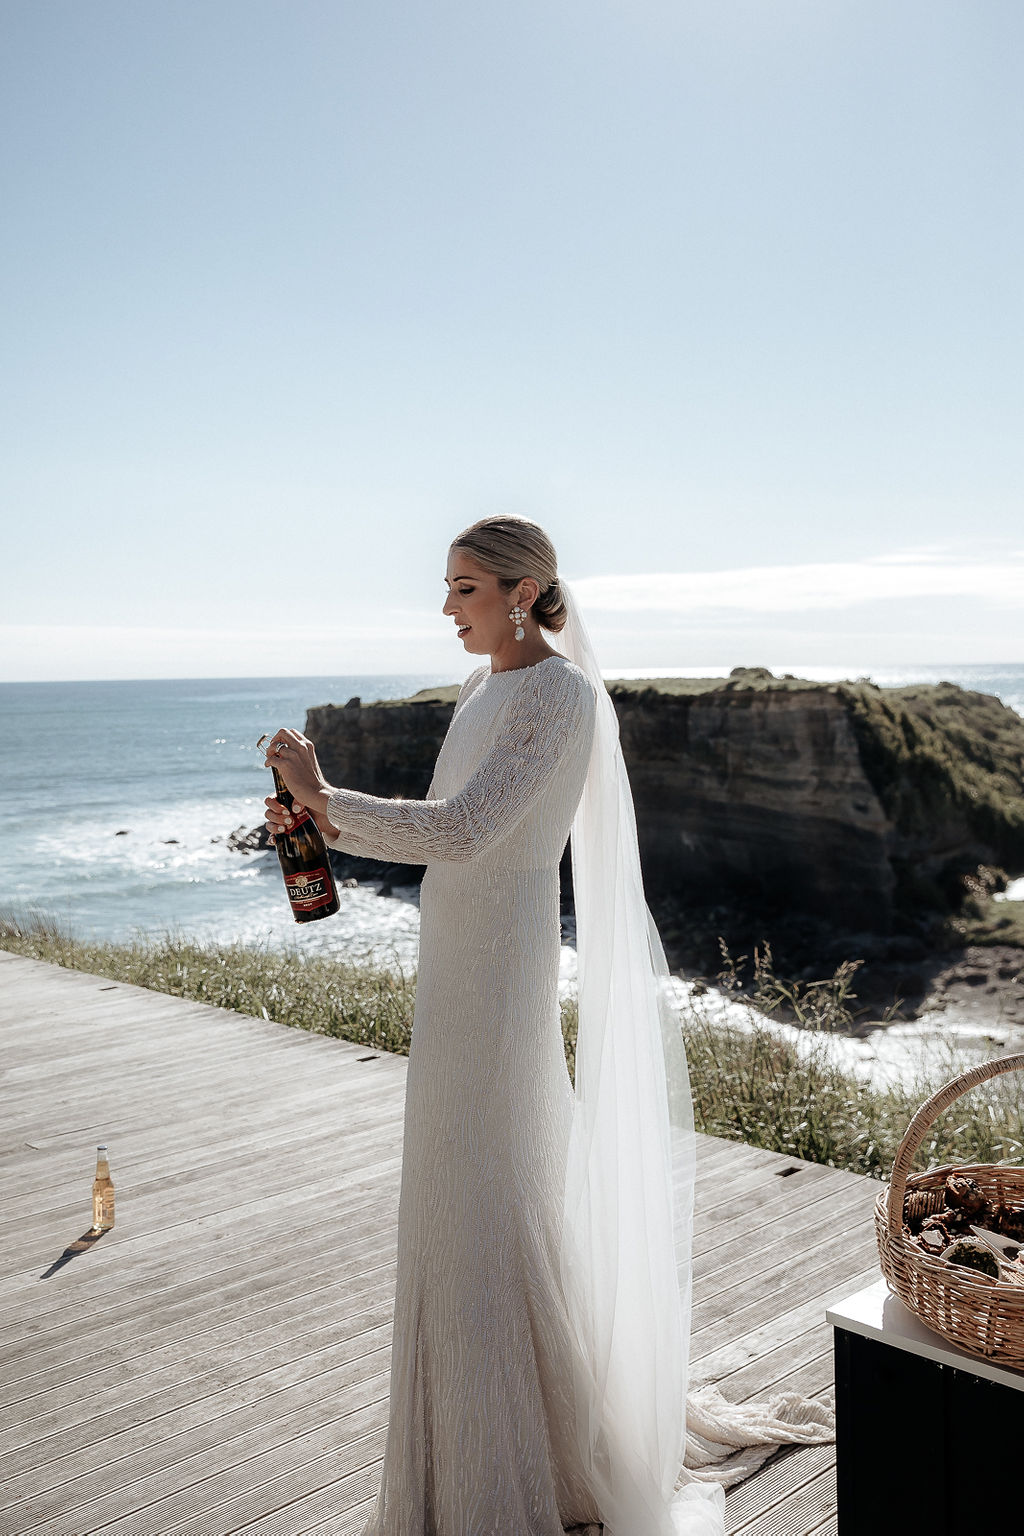 KWH real bride Hannah pops a bottle of bubbly with the New Zealand coast in the background. She dons the trendy sequined Margareta gown with low back and long sleeves.